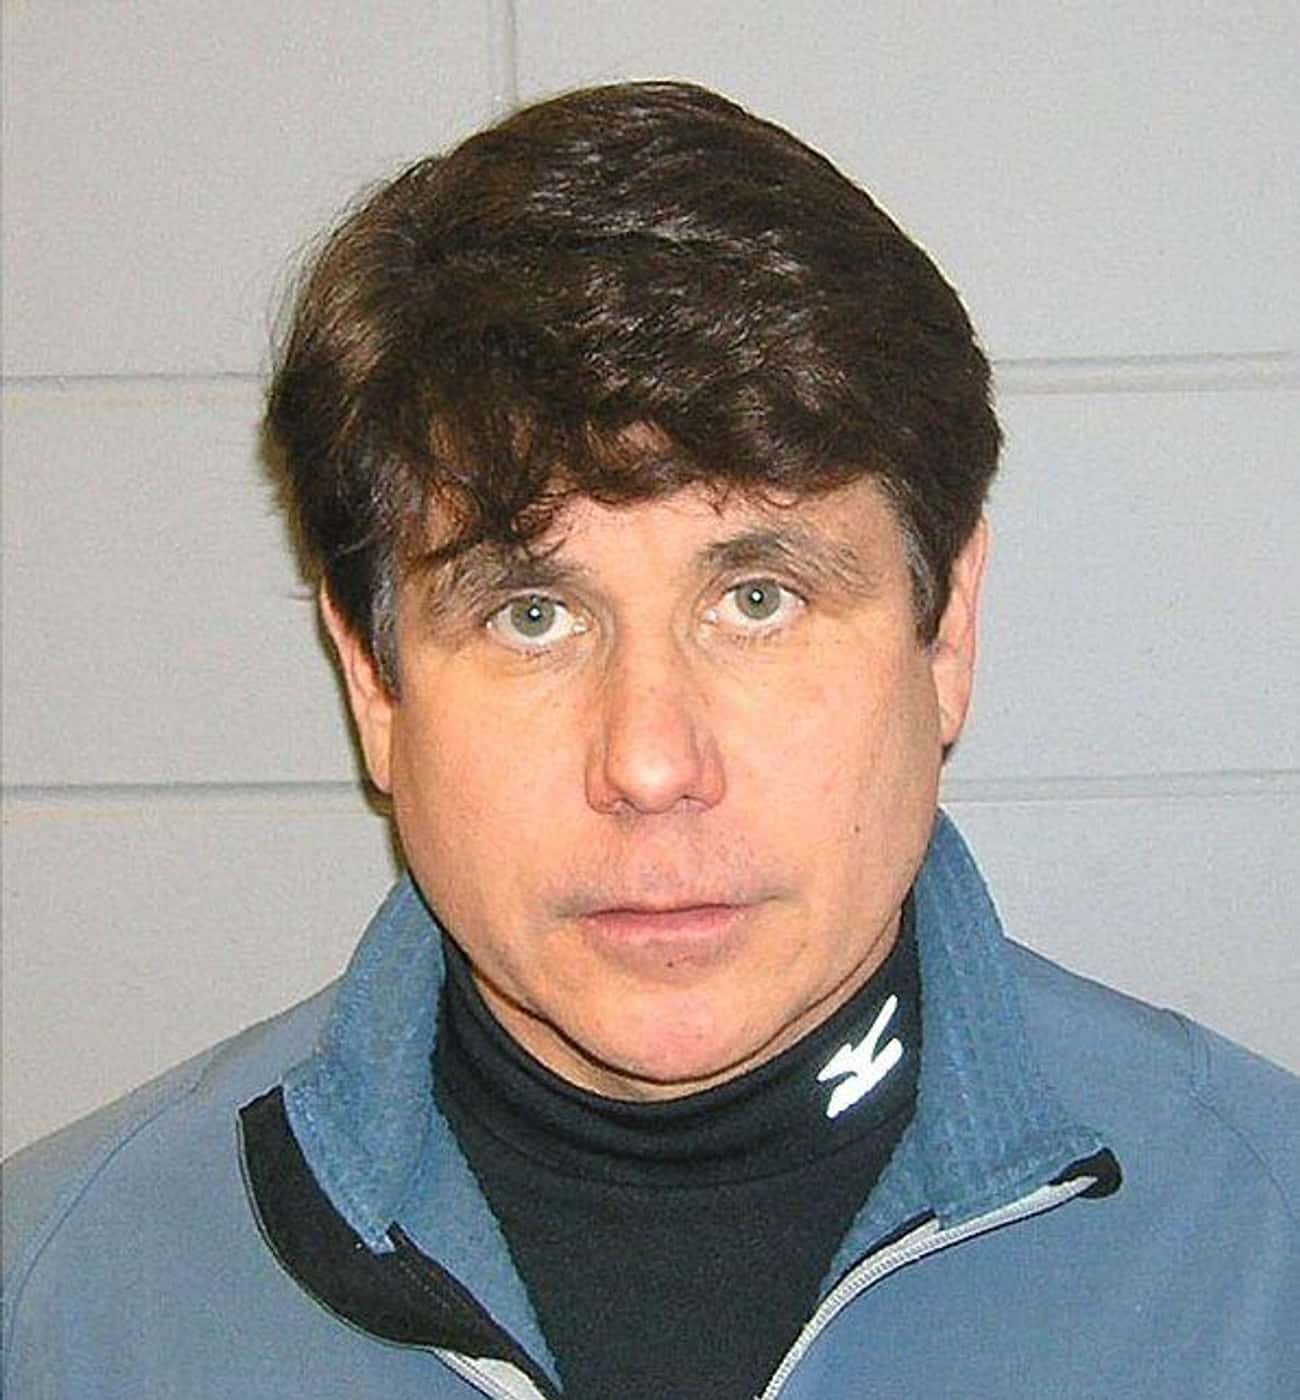 Rod Blagojevich Left Politics For Reality TV... And Then Jail